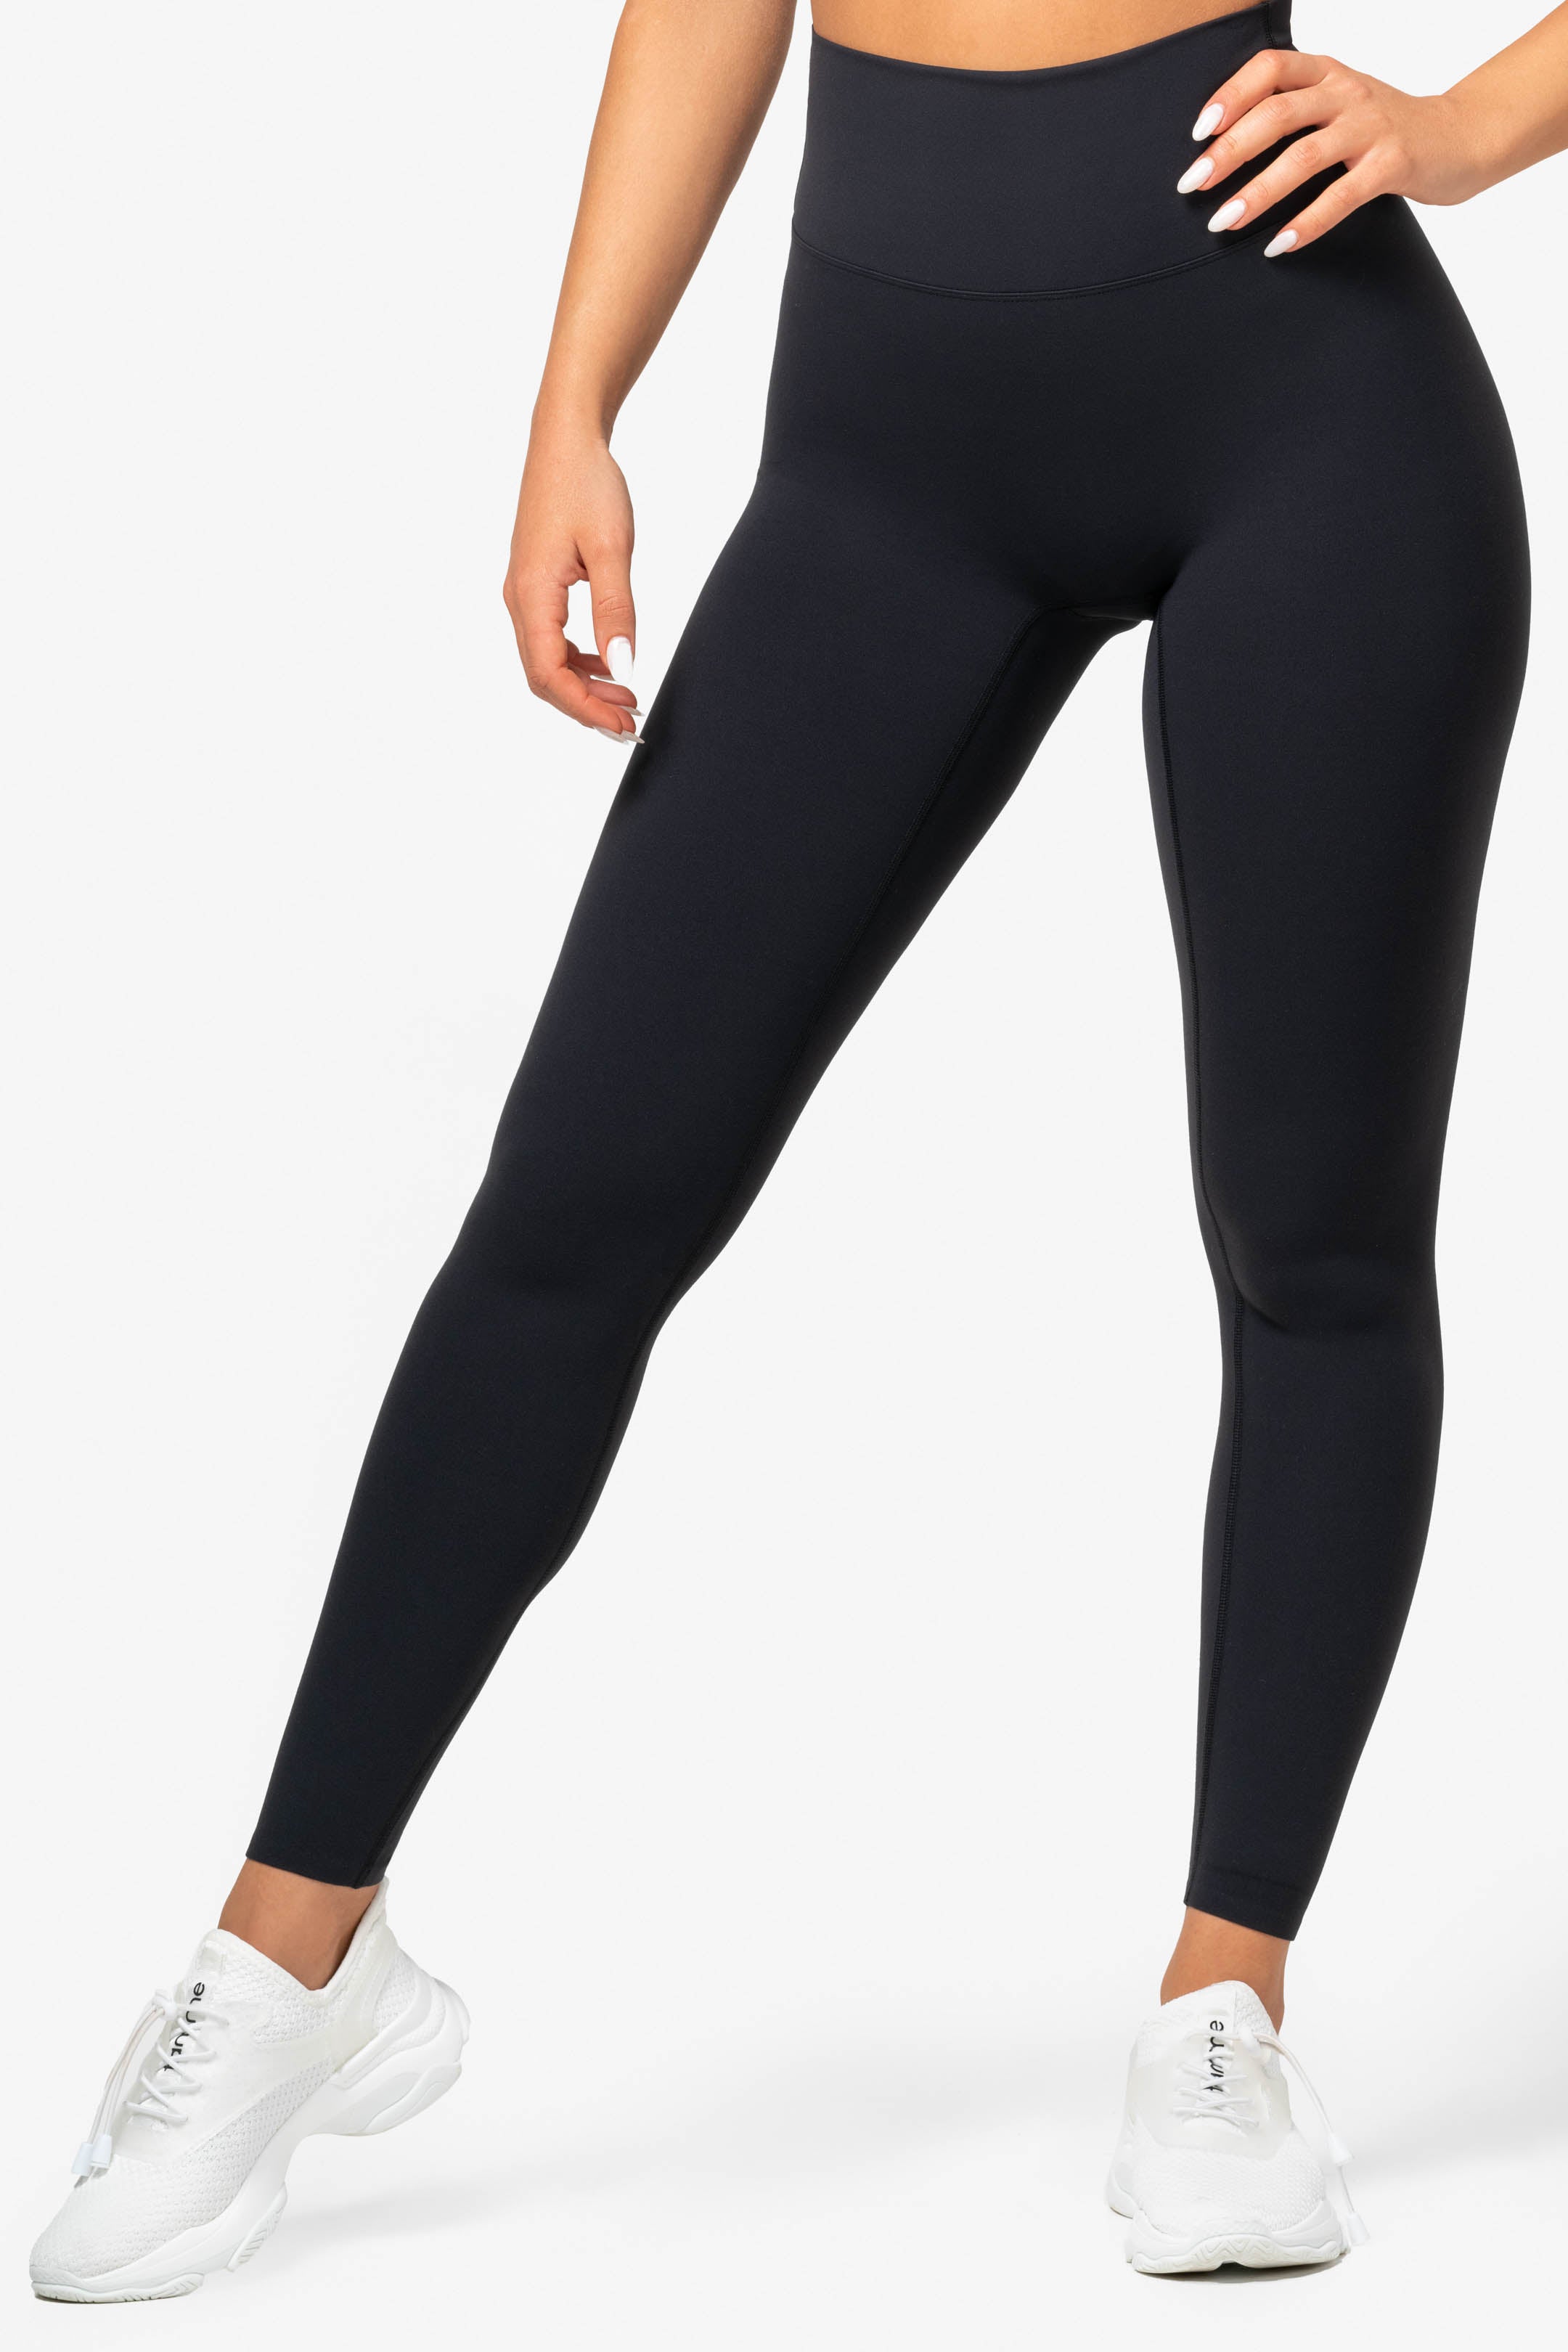 Famme - Women's Sportswear, outdoor and loungewear for the Gym, Yoga,